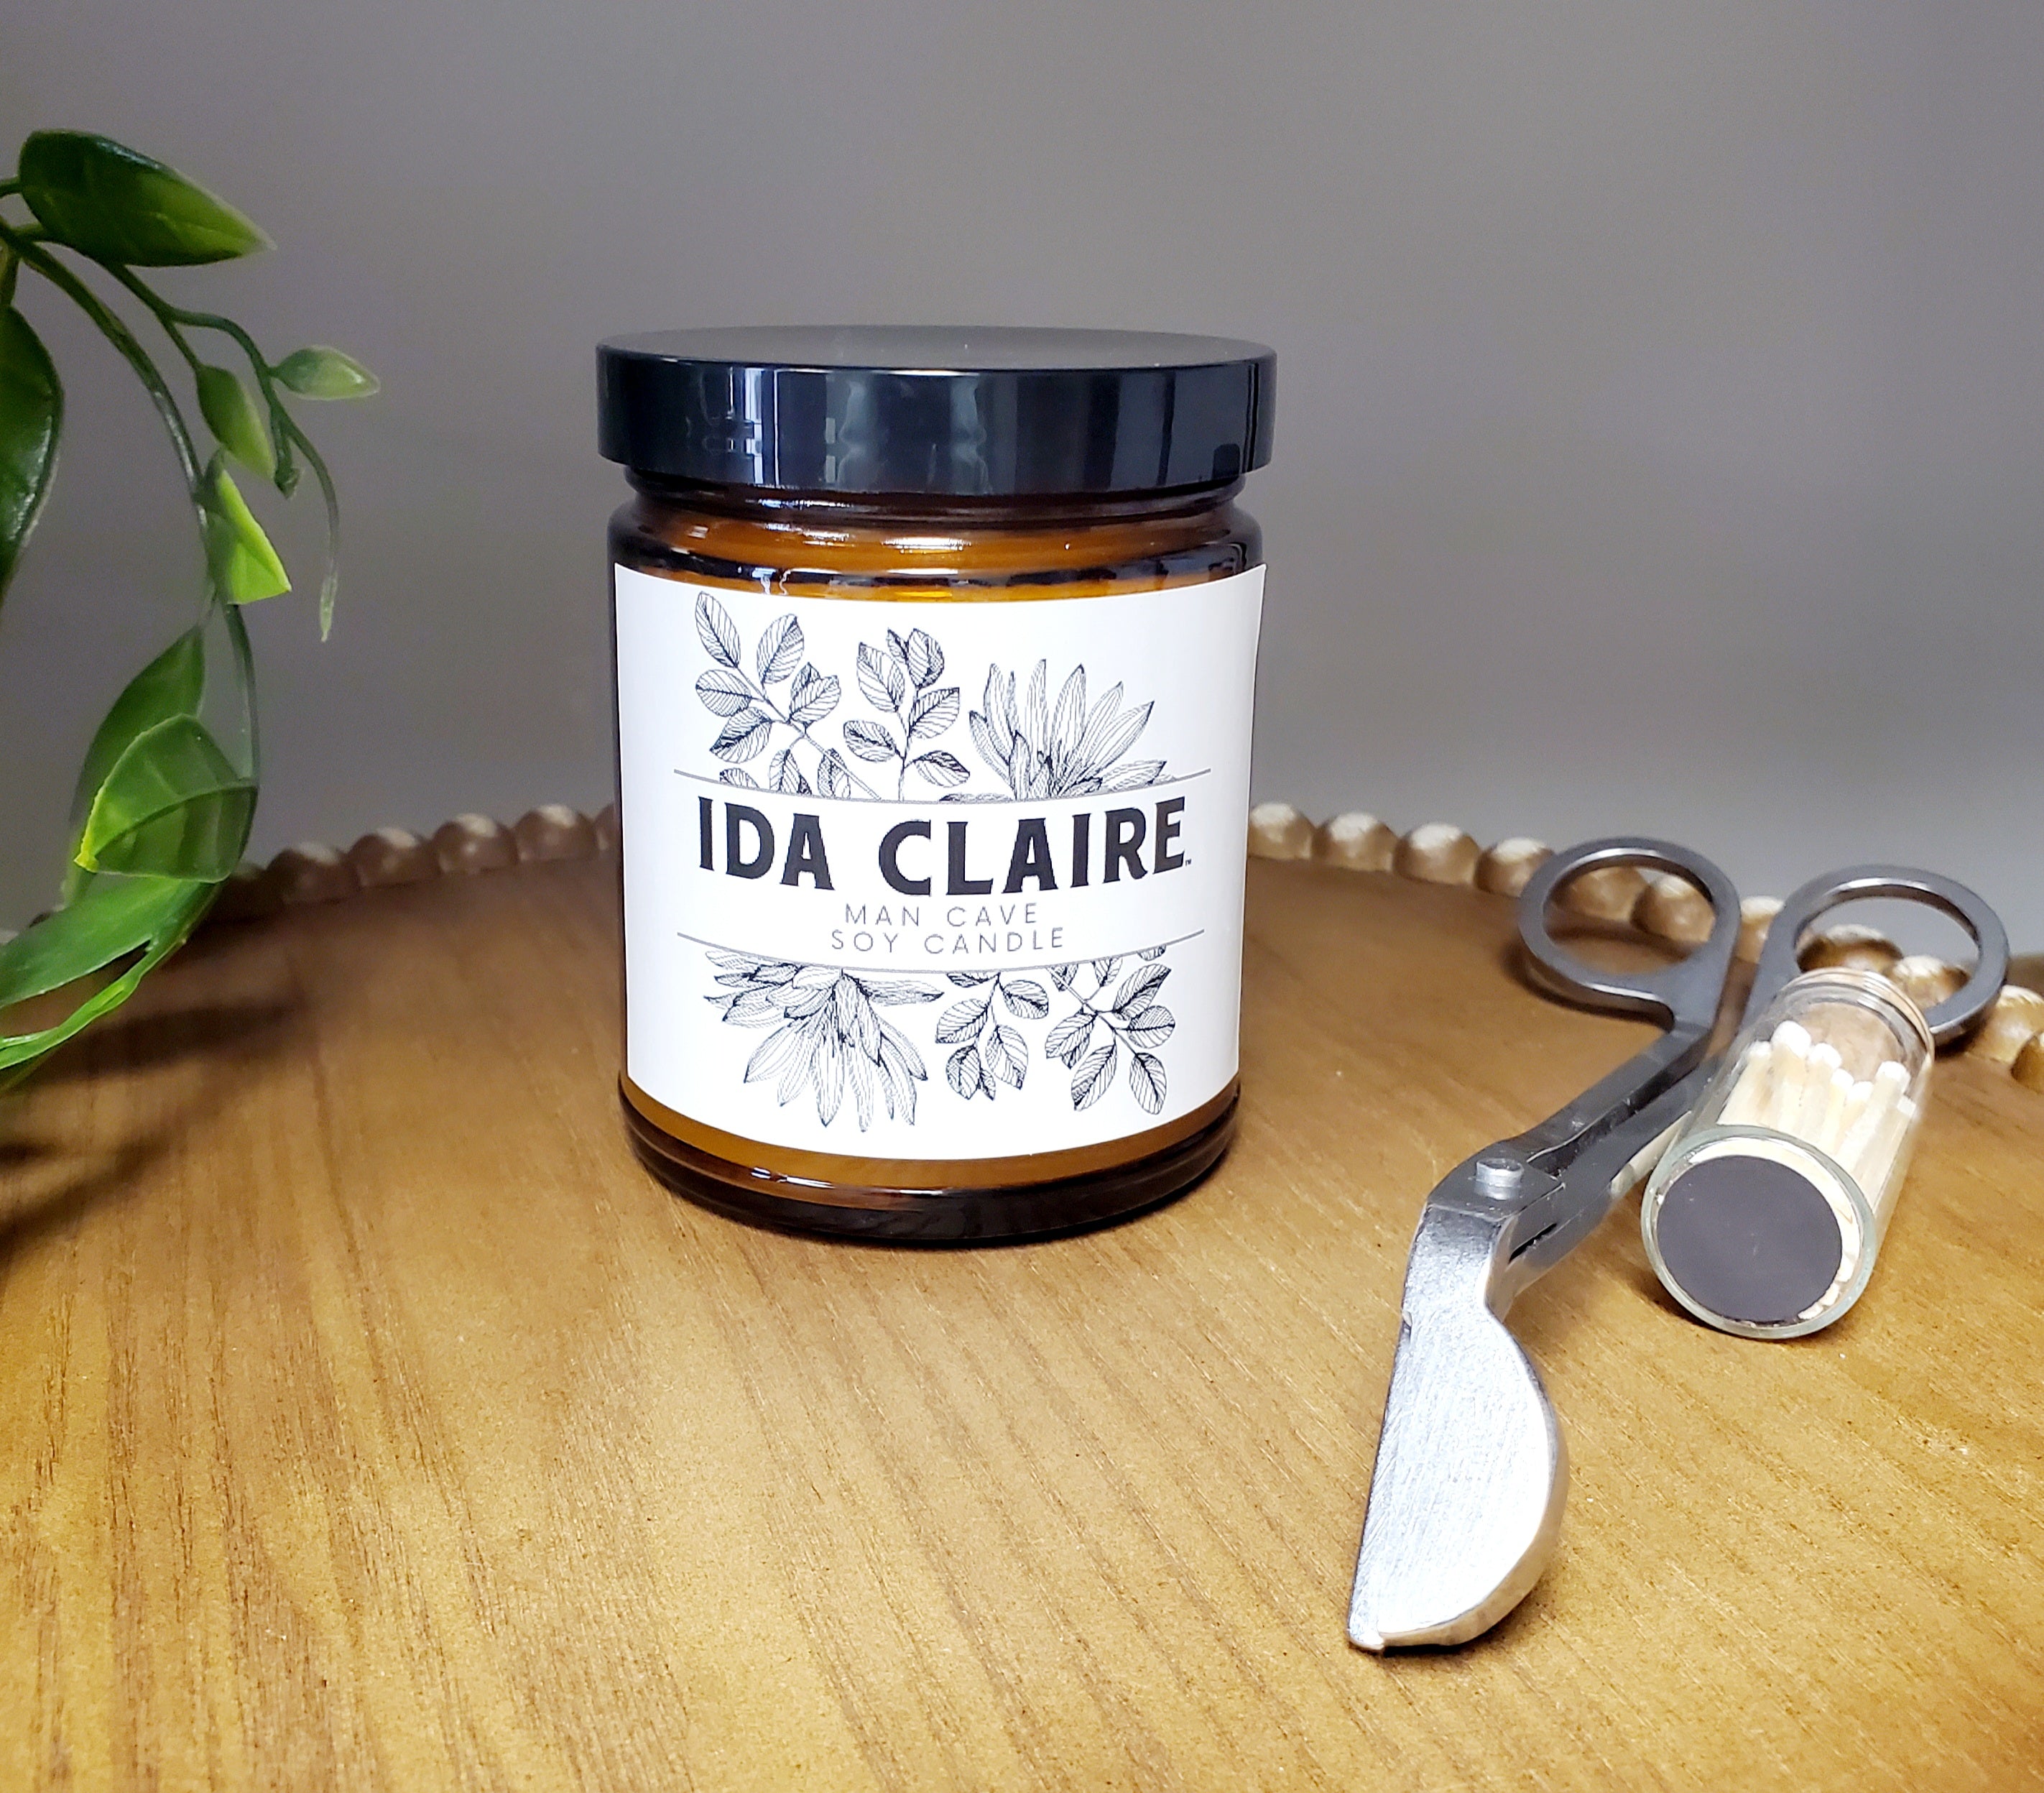 3 Signature Scents seen at Ida Claire in Addison, Texas , Rosemary- Man cave TM- Sandalwood, Now in Amber glass